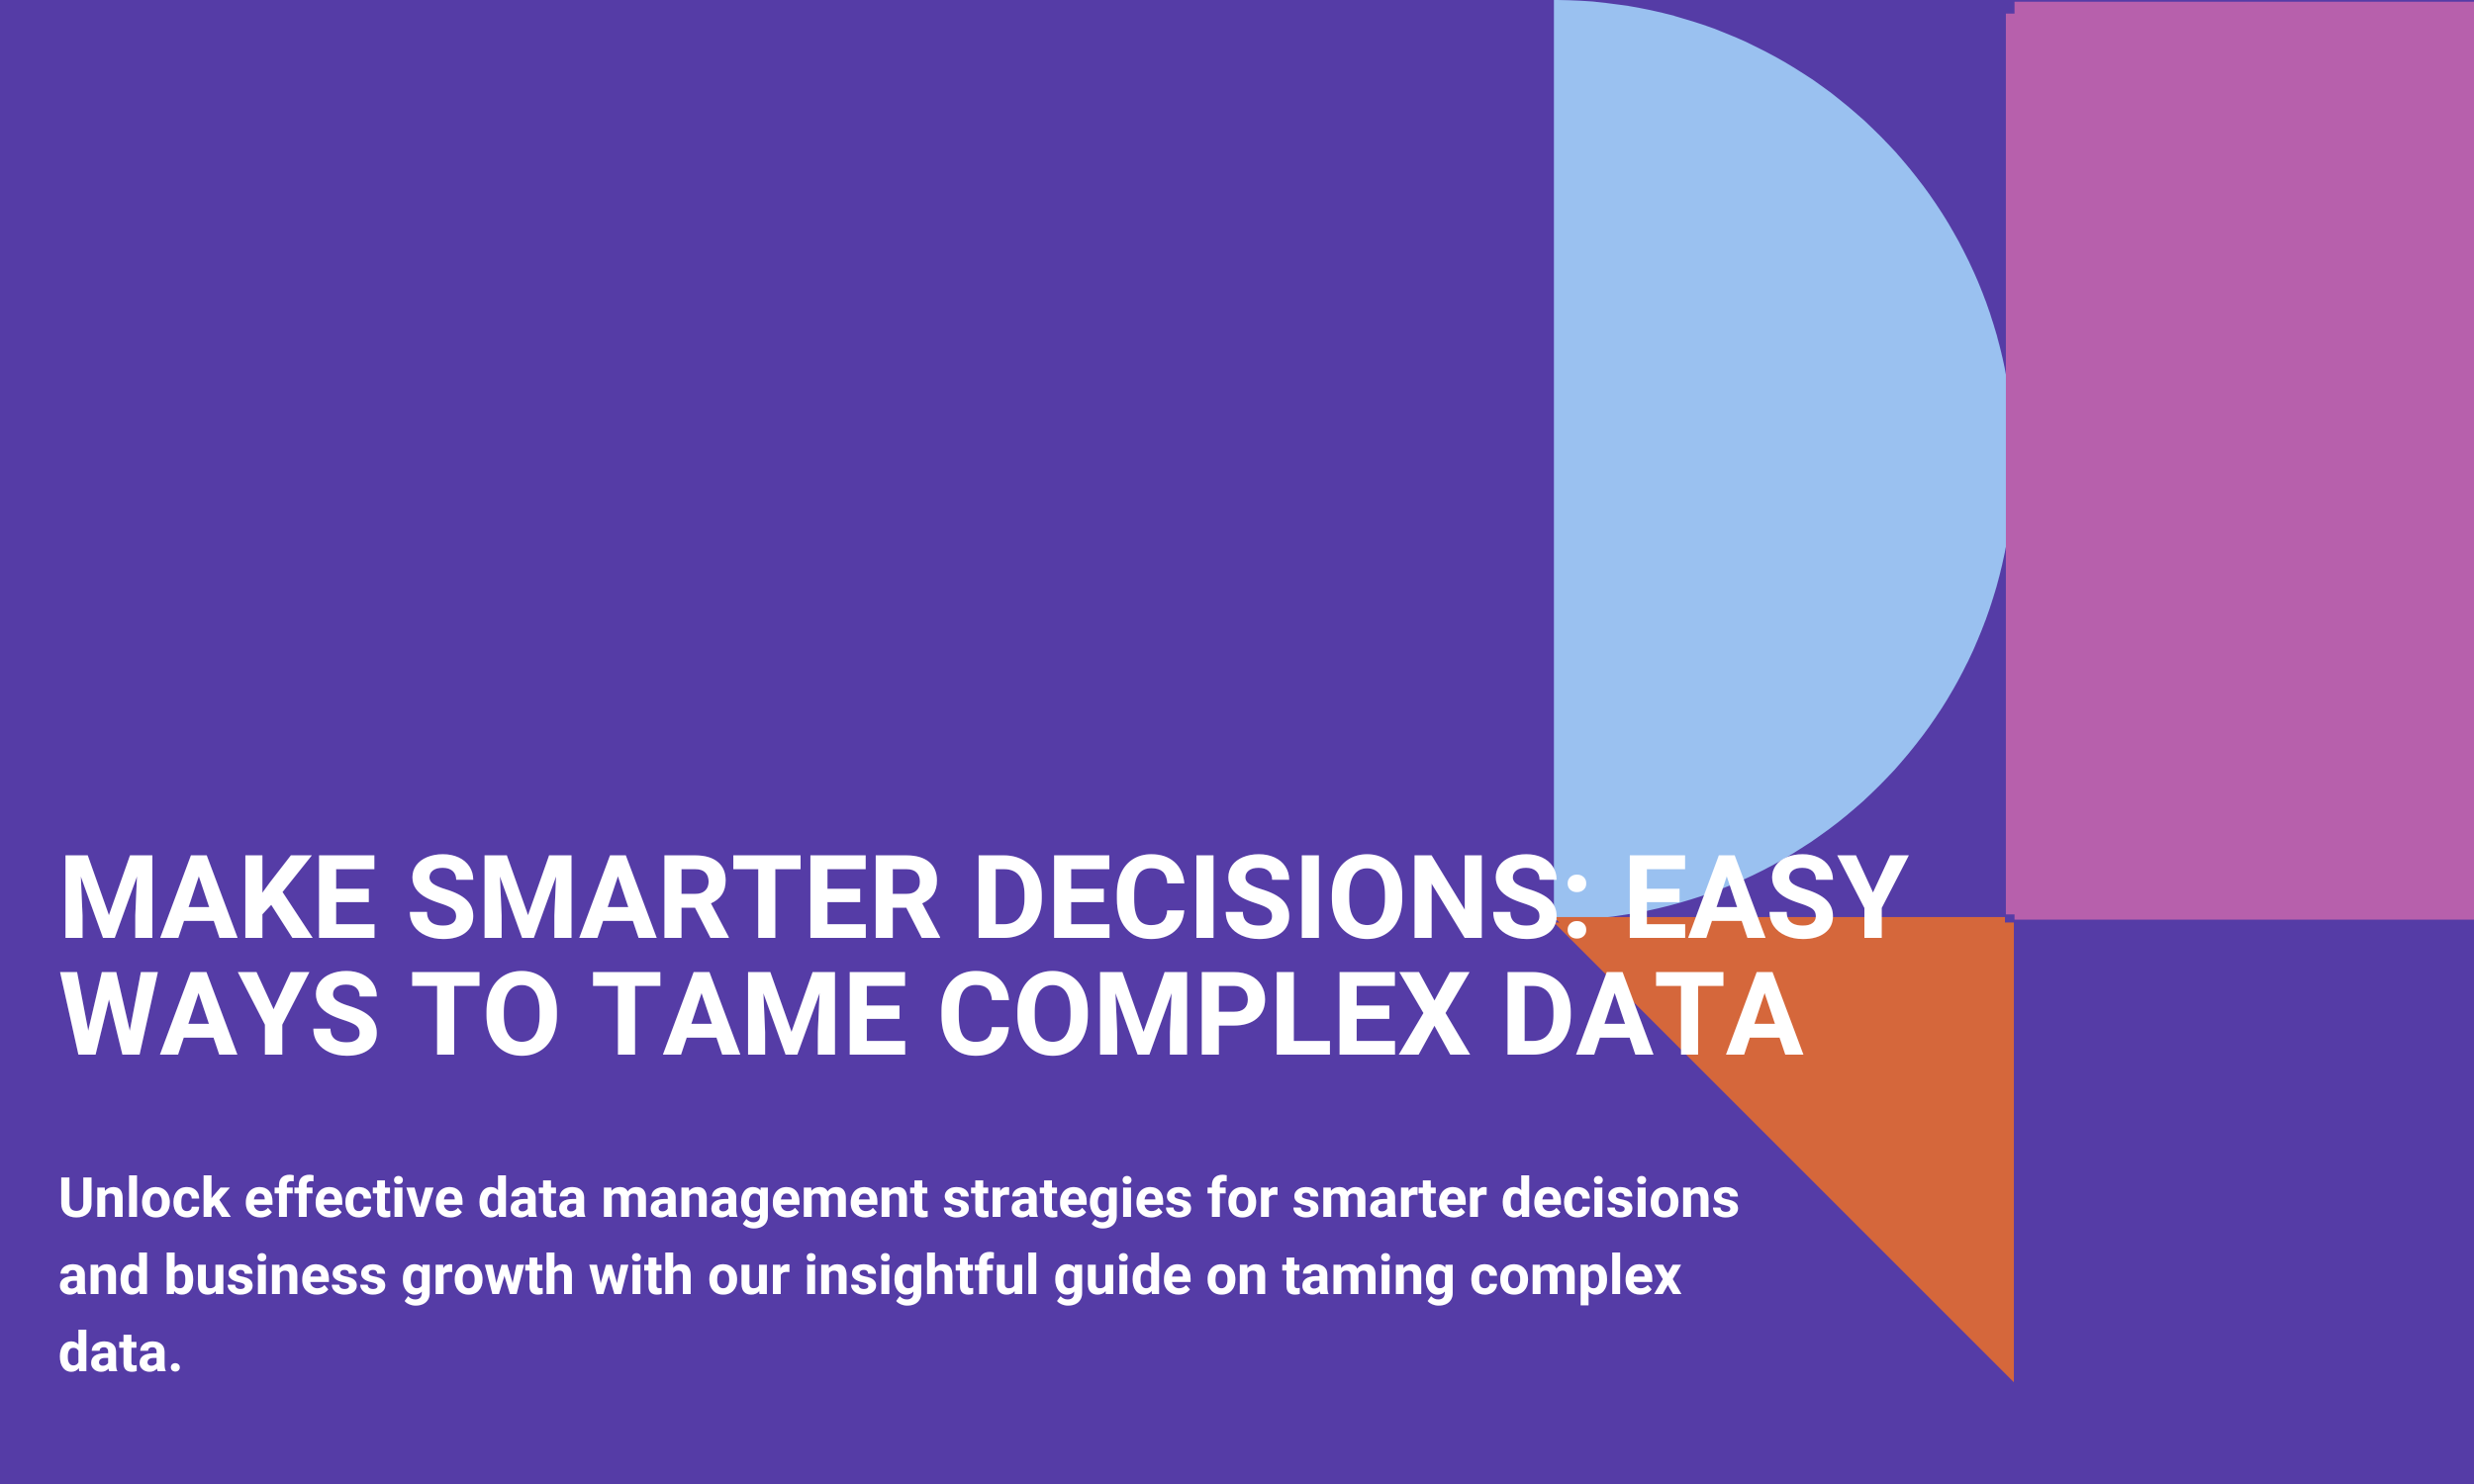 Make Smarter Decisions: Easy Ways to Tame Complex Data